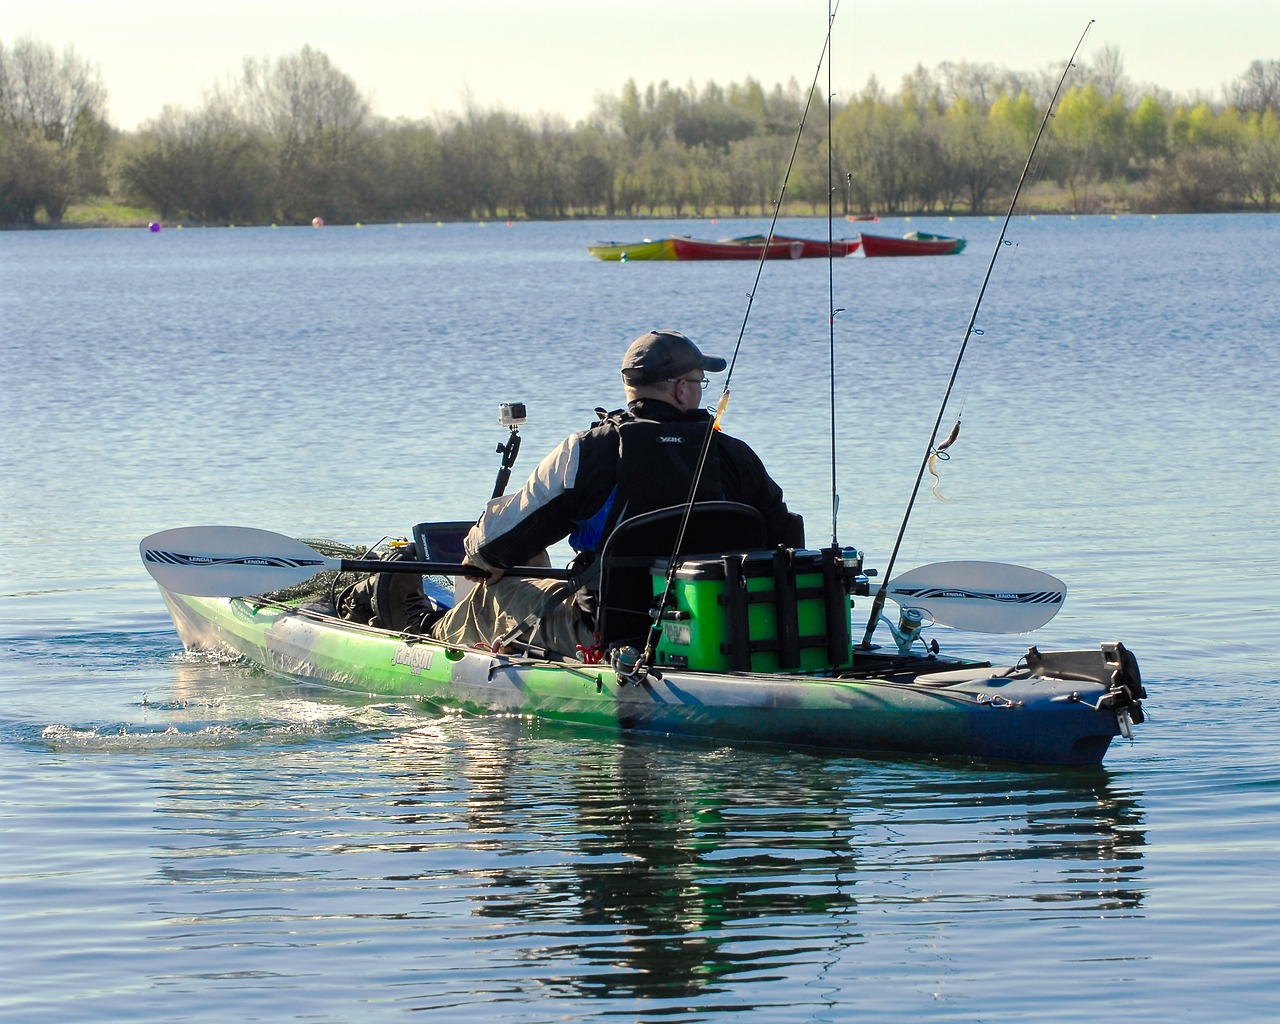 Kayak Weight Limit: How Much Can Kayaks Take?